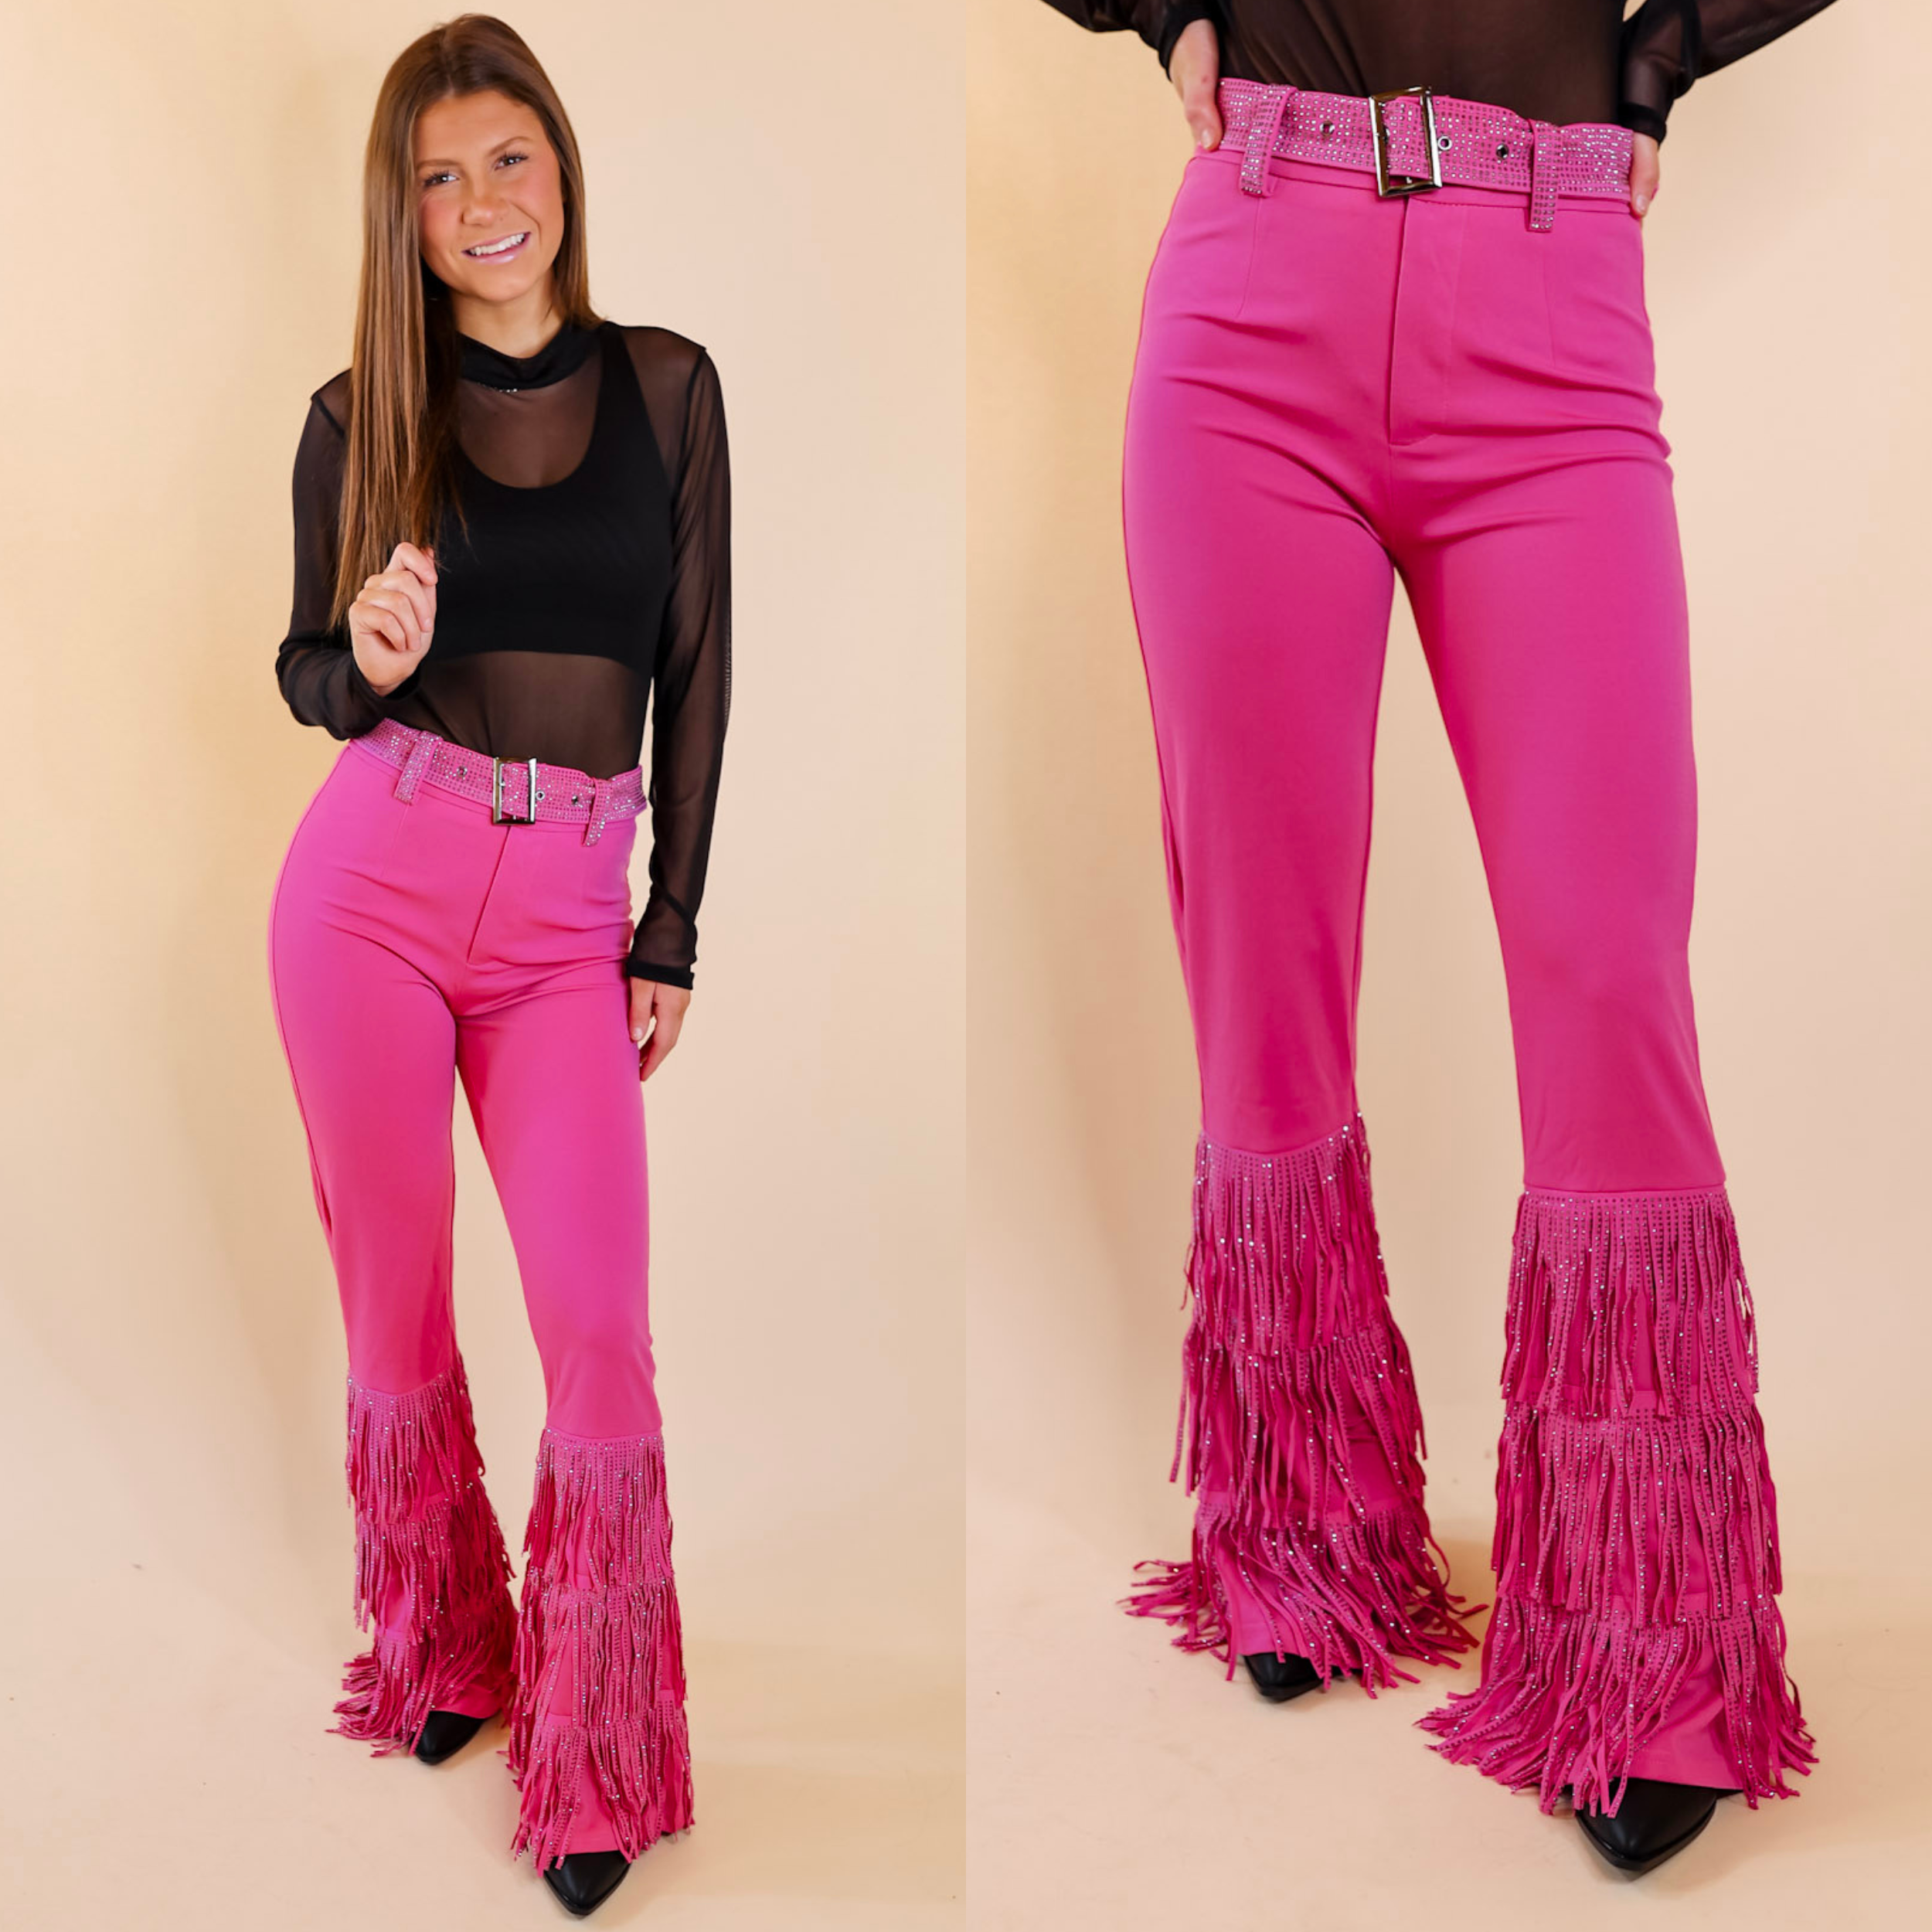 Model is wearing a pair of hot pink bell bottom pants with a crystal belt and crystal fringe from the knee down. Model has it paired with black booties, a black bodysuit, and silver jewelry.